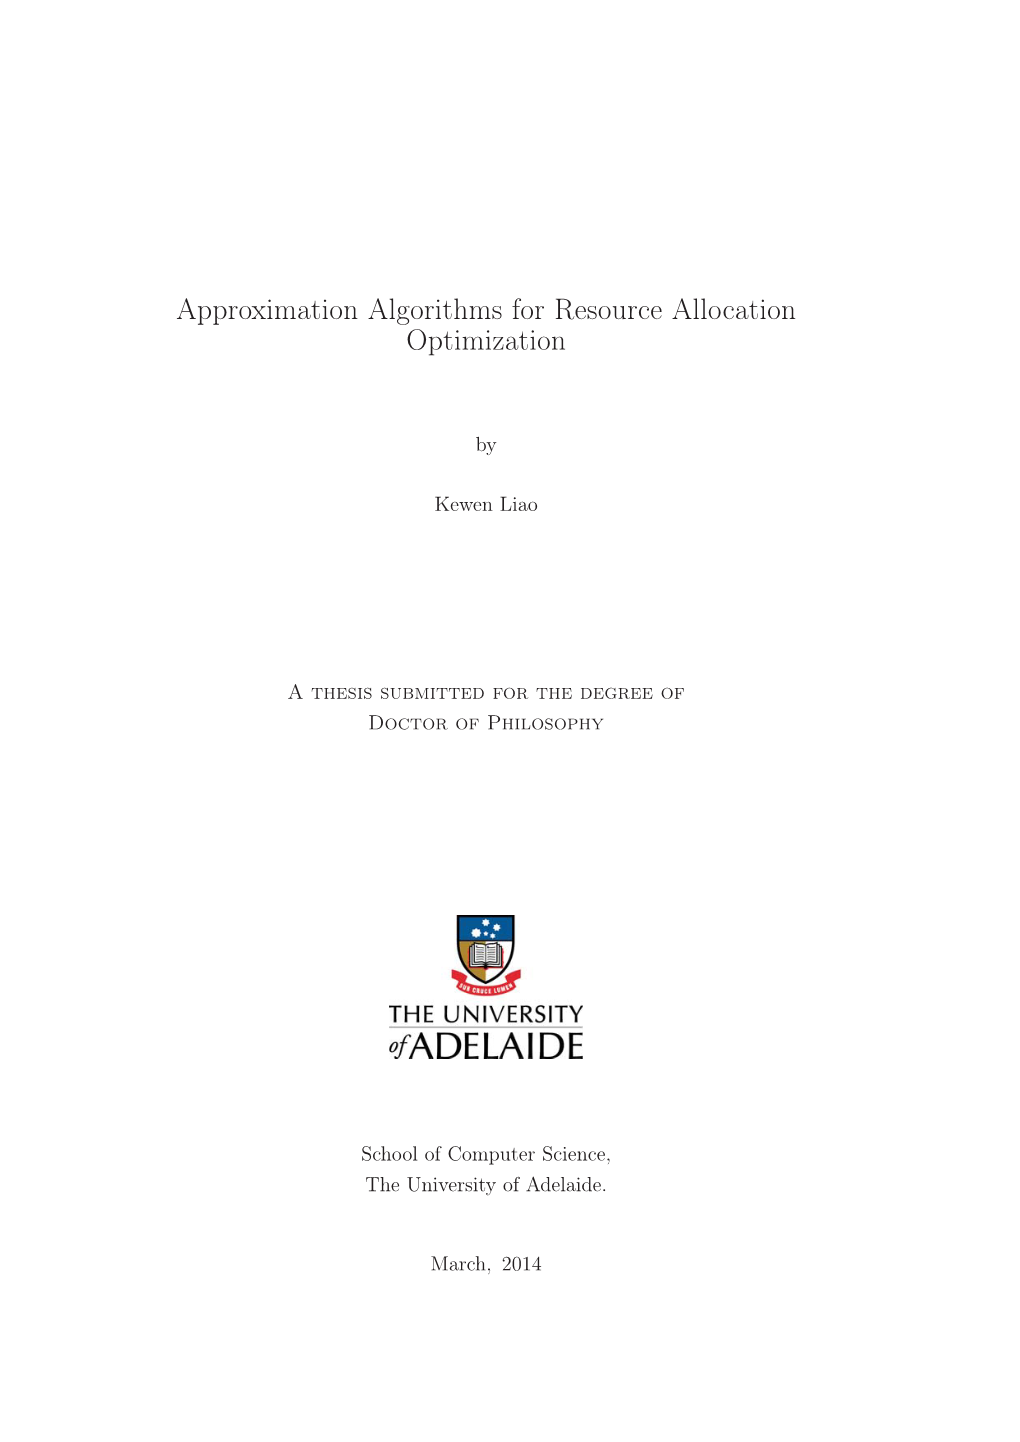 Approximation Algorithms for Resource Allocation Optimization